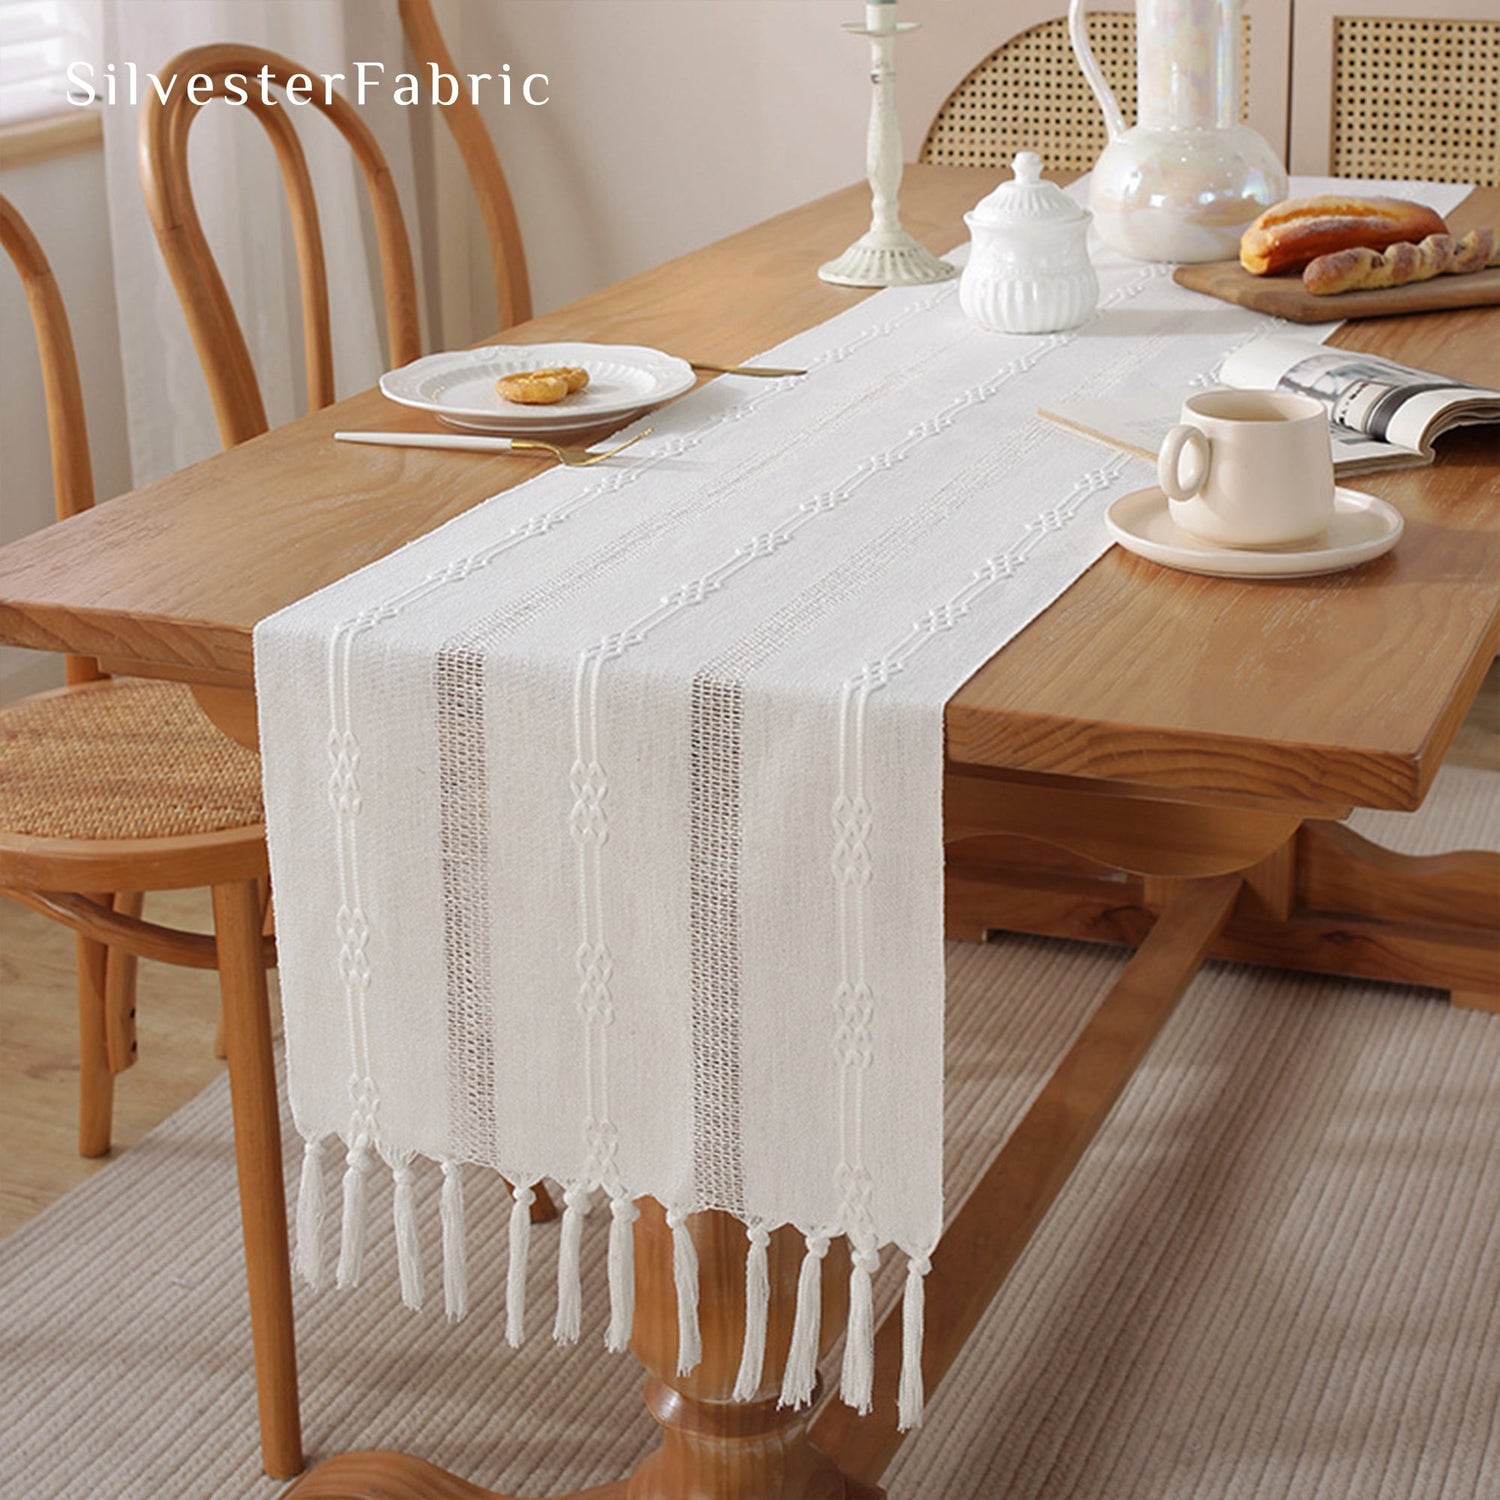 Table Runners丨Free Shipping - SilvesterFabric